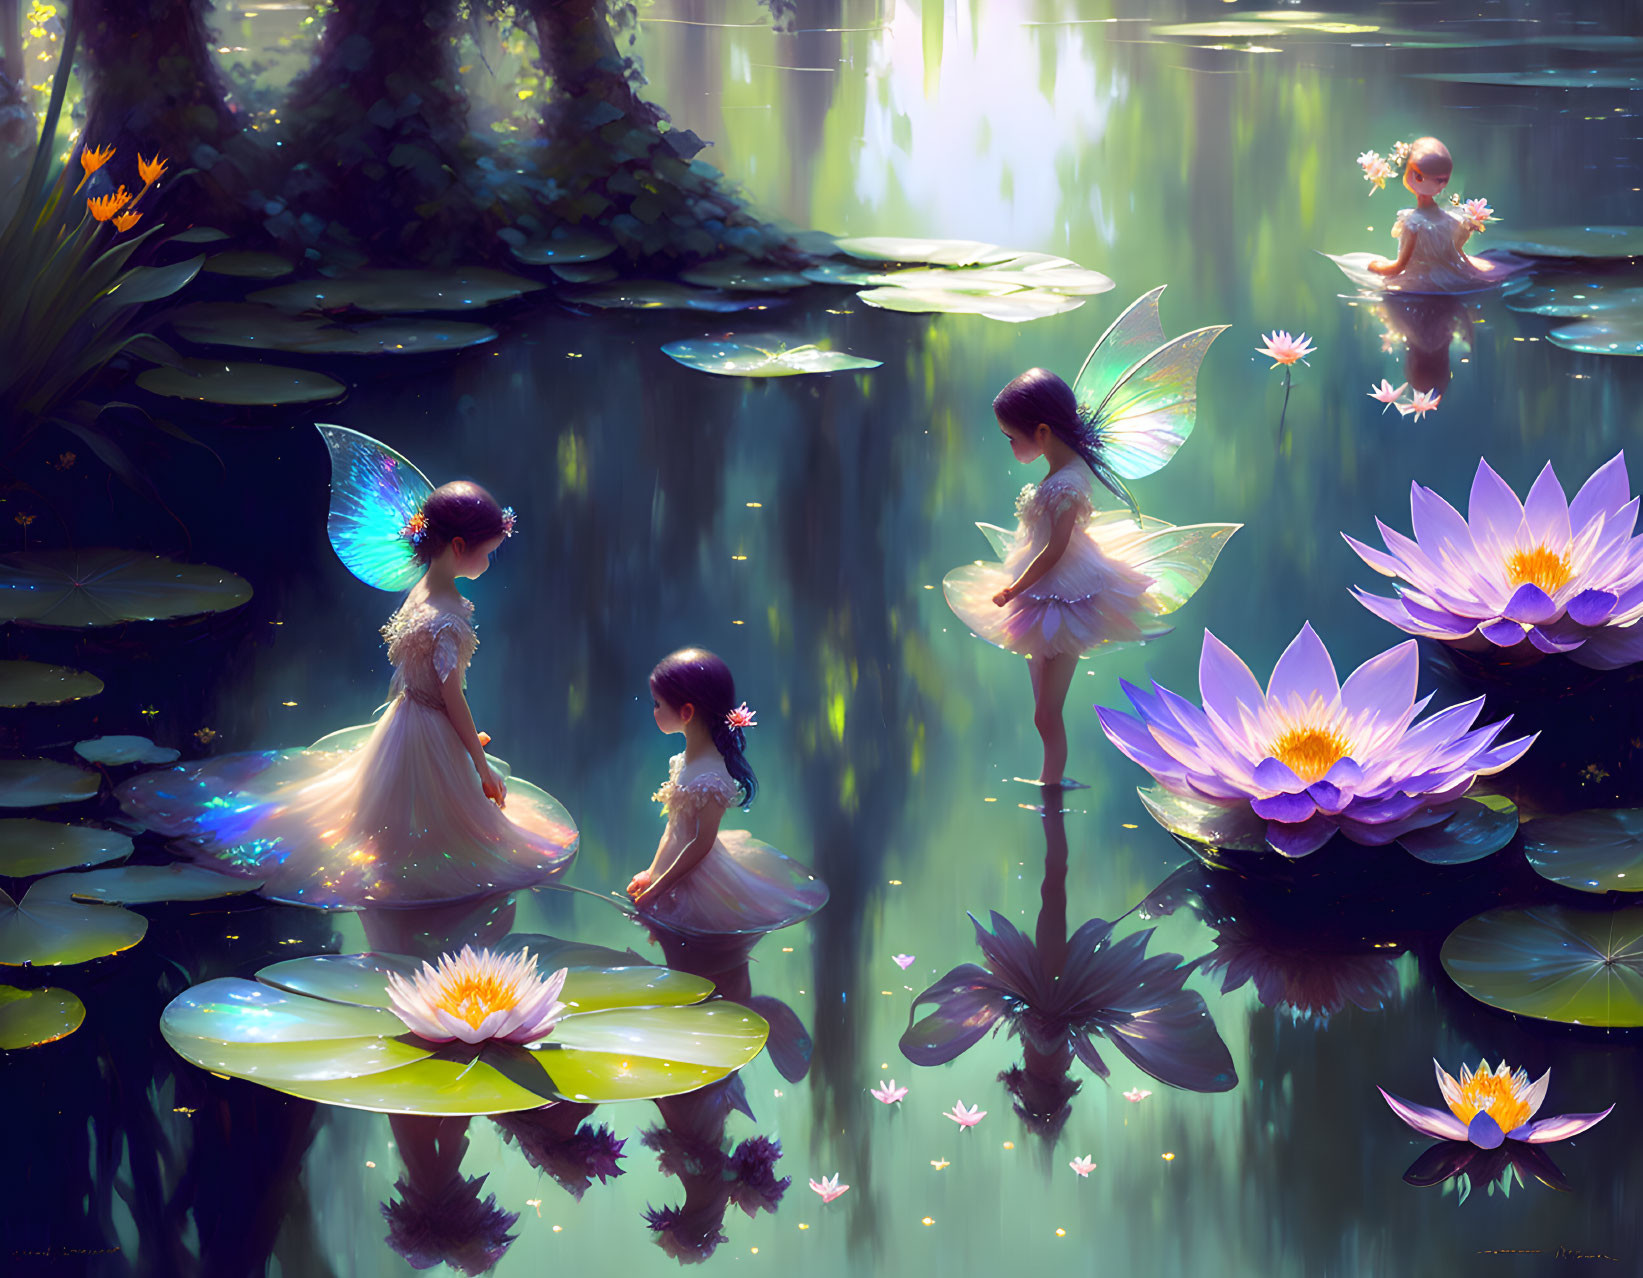 A group of Water pixies